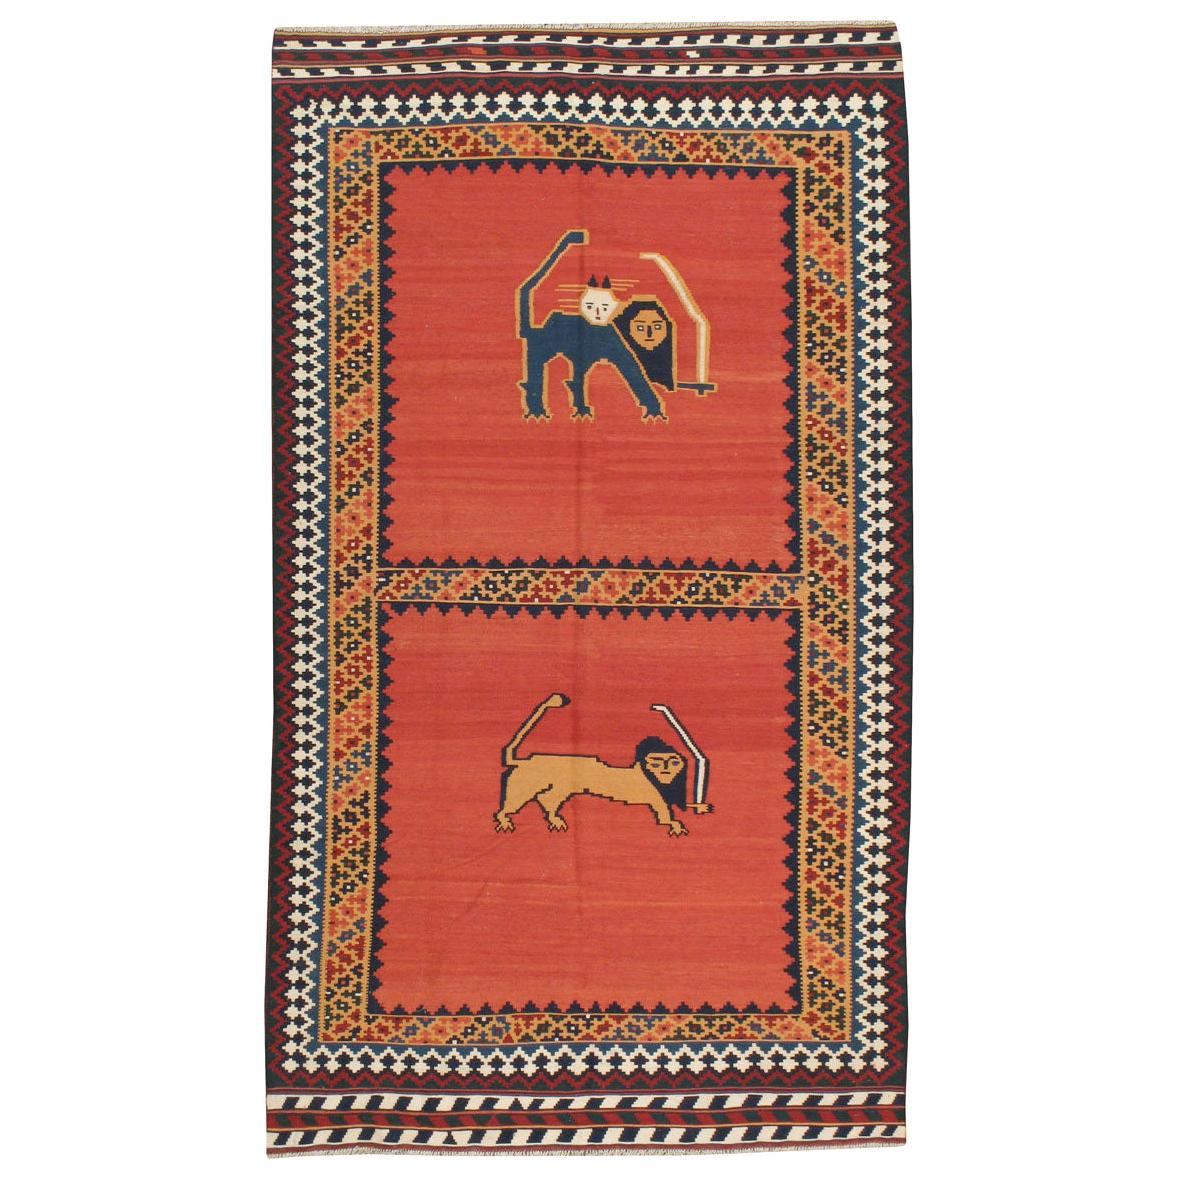 Tribal Mid-20th Century Persian Qashqai Pictorial Flat-Weave Kilim Accent Rug For Sale